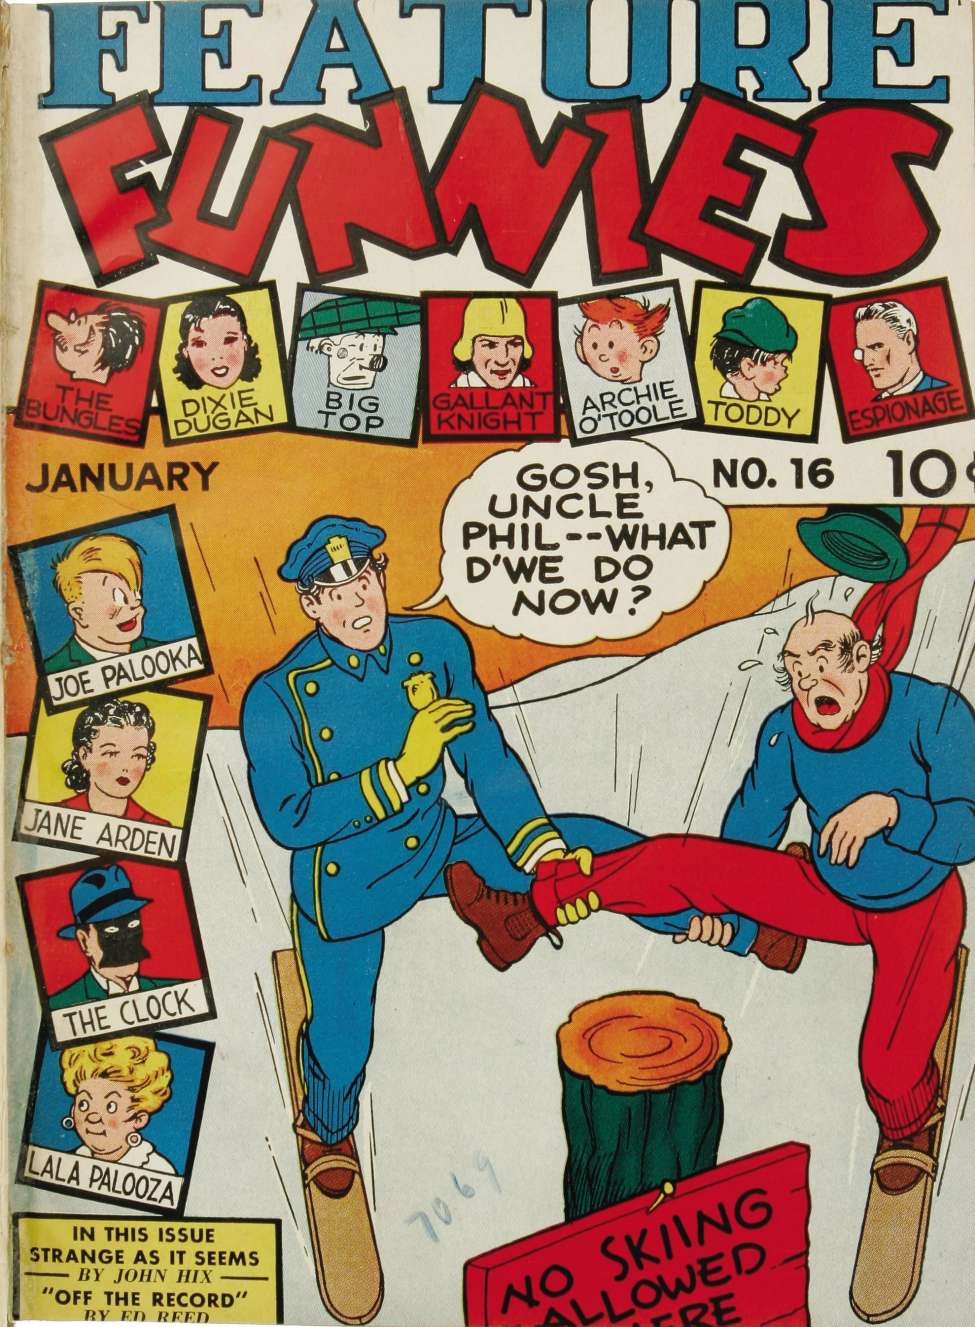 Comic Book Cover For Feature Funnies 16 (paper/fiche)